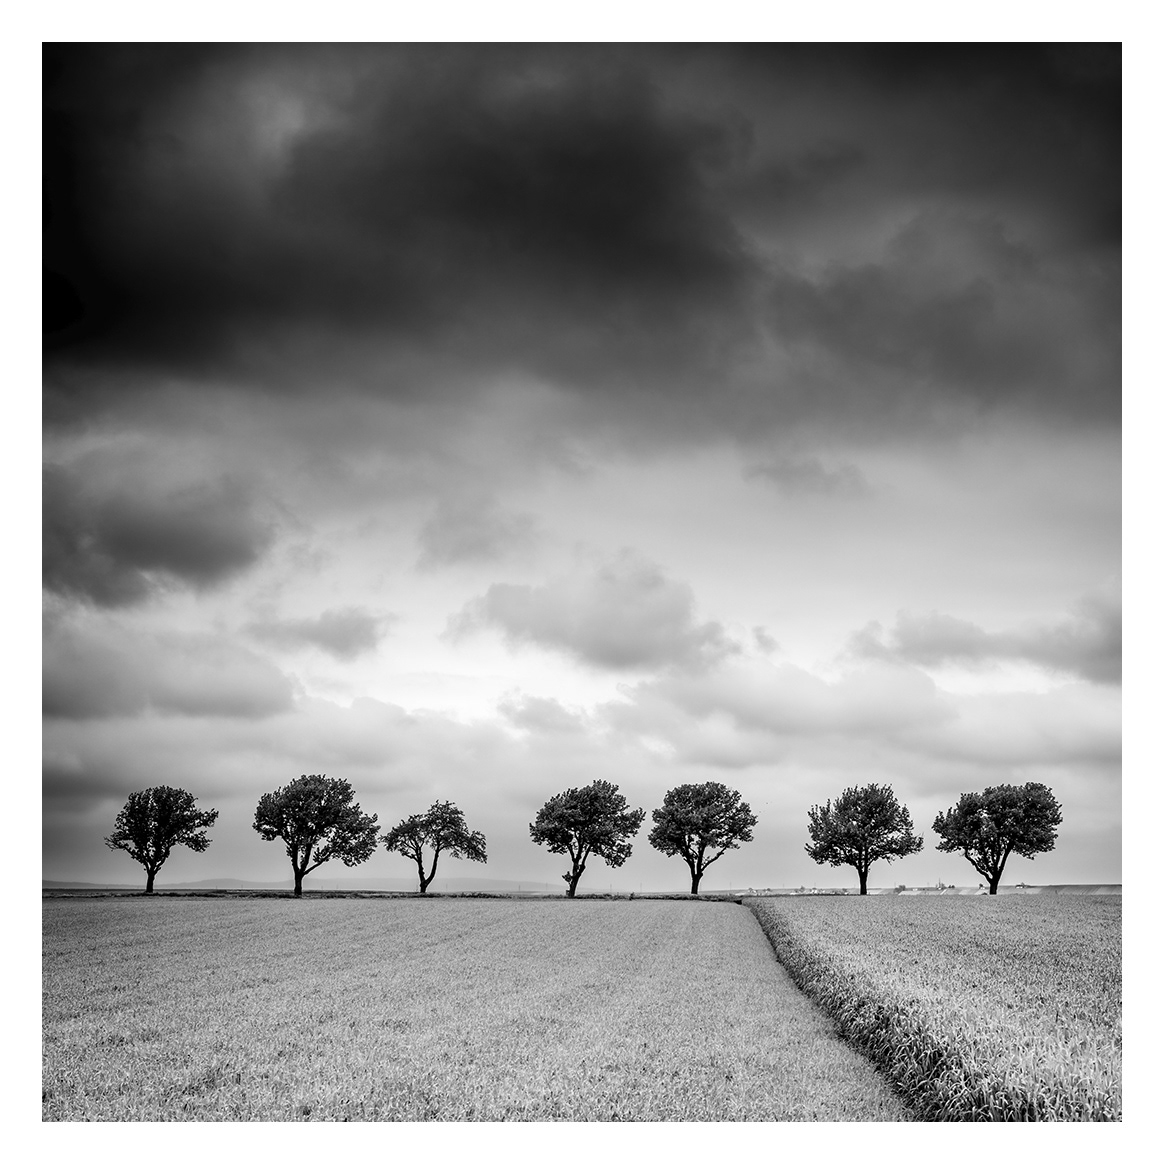 Gerald Berghammer | Trees on the edge of field, cloudy, storm, Austria | Available for Sale